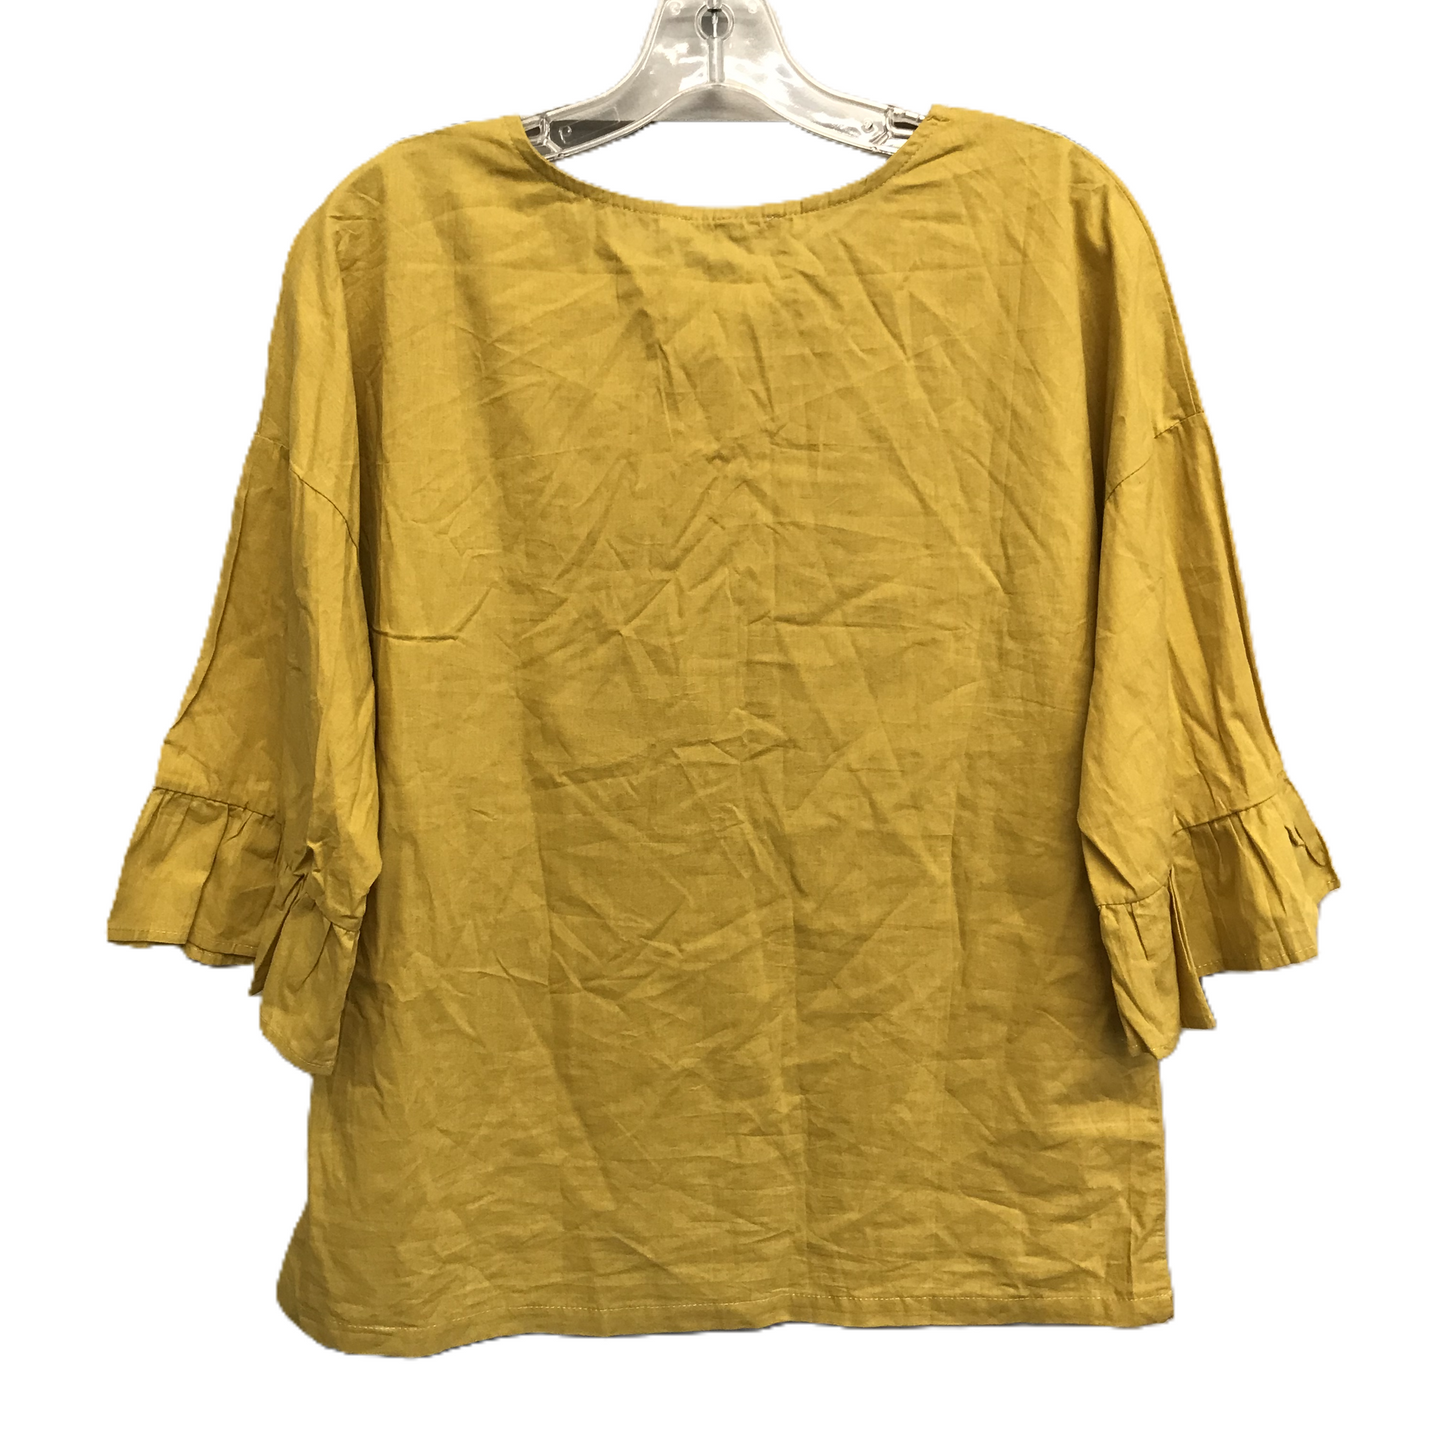 Yellow Top Short Sleeve By Cellabie, Size: M